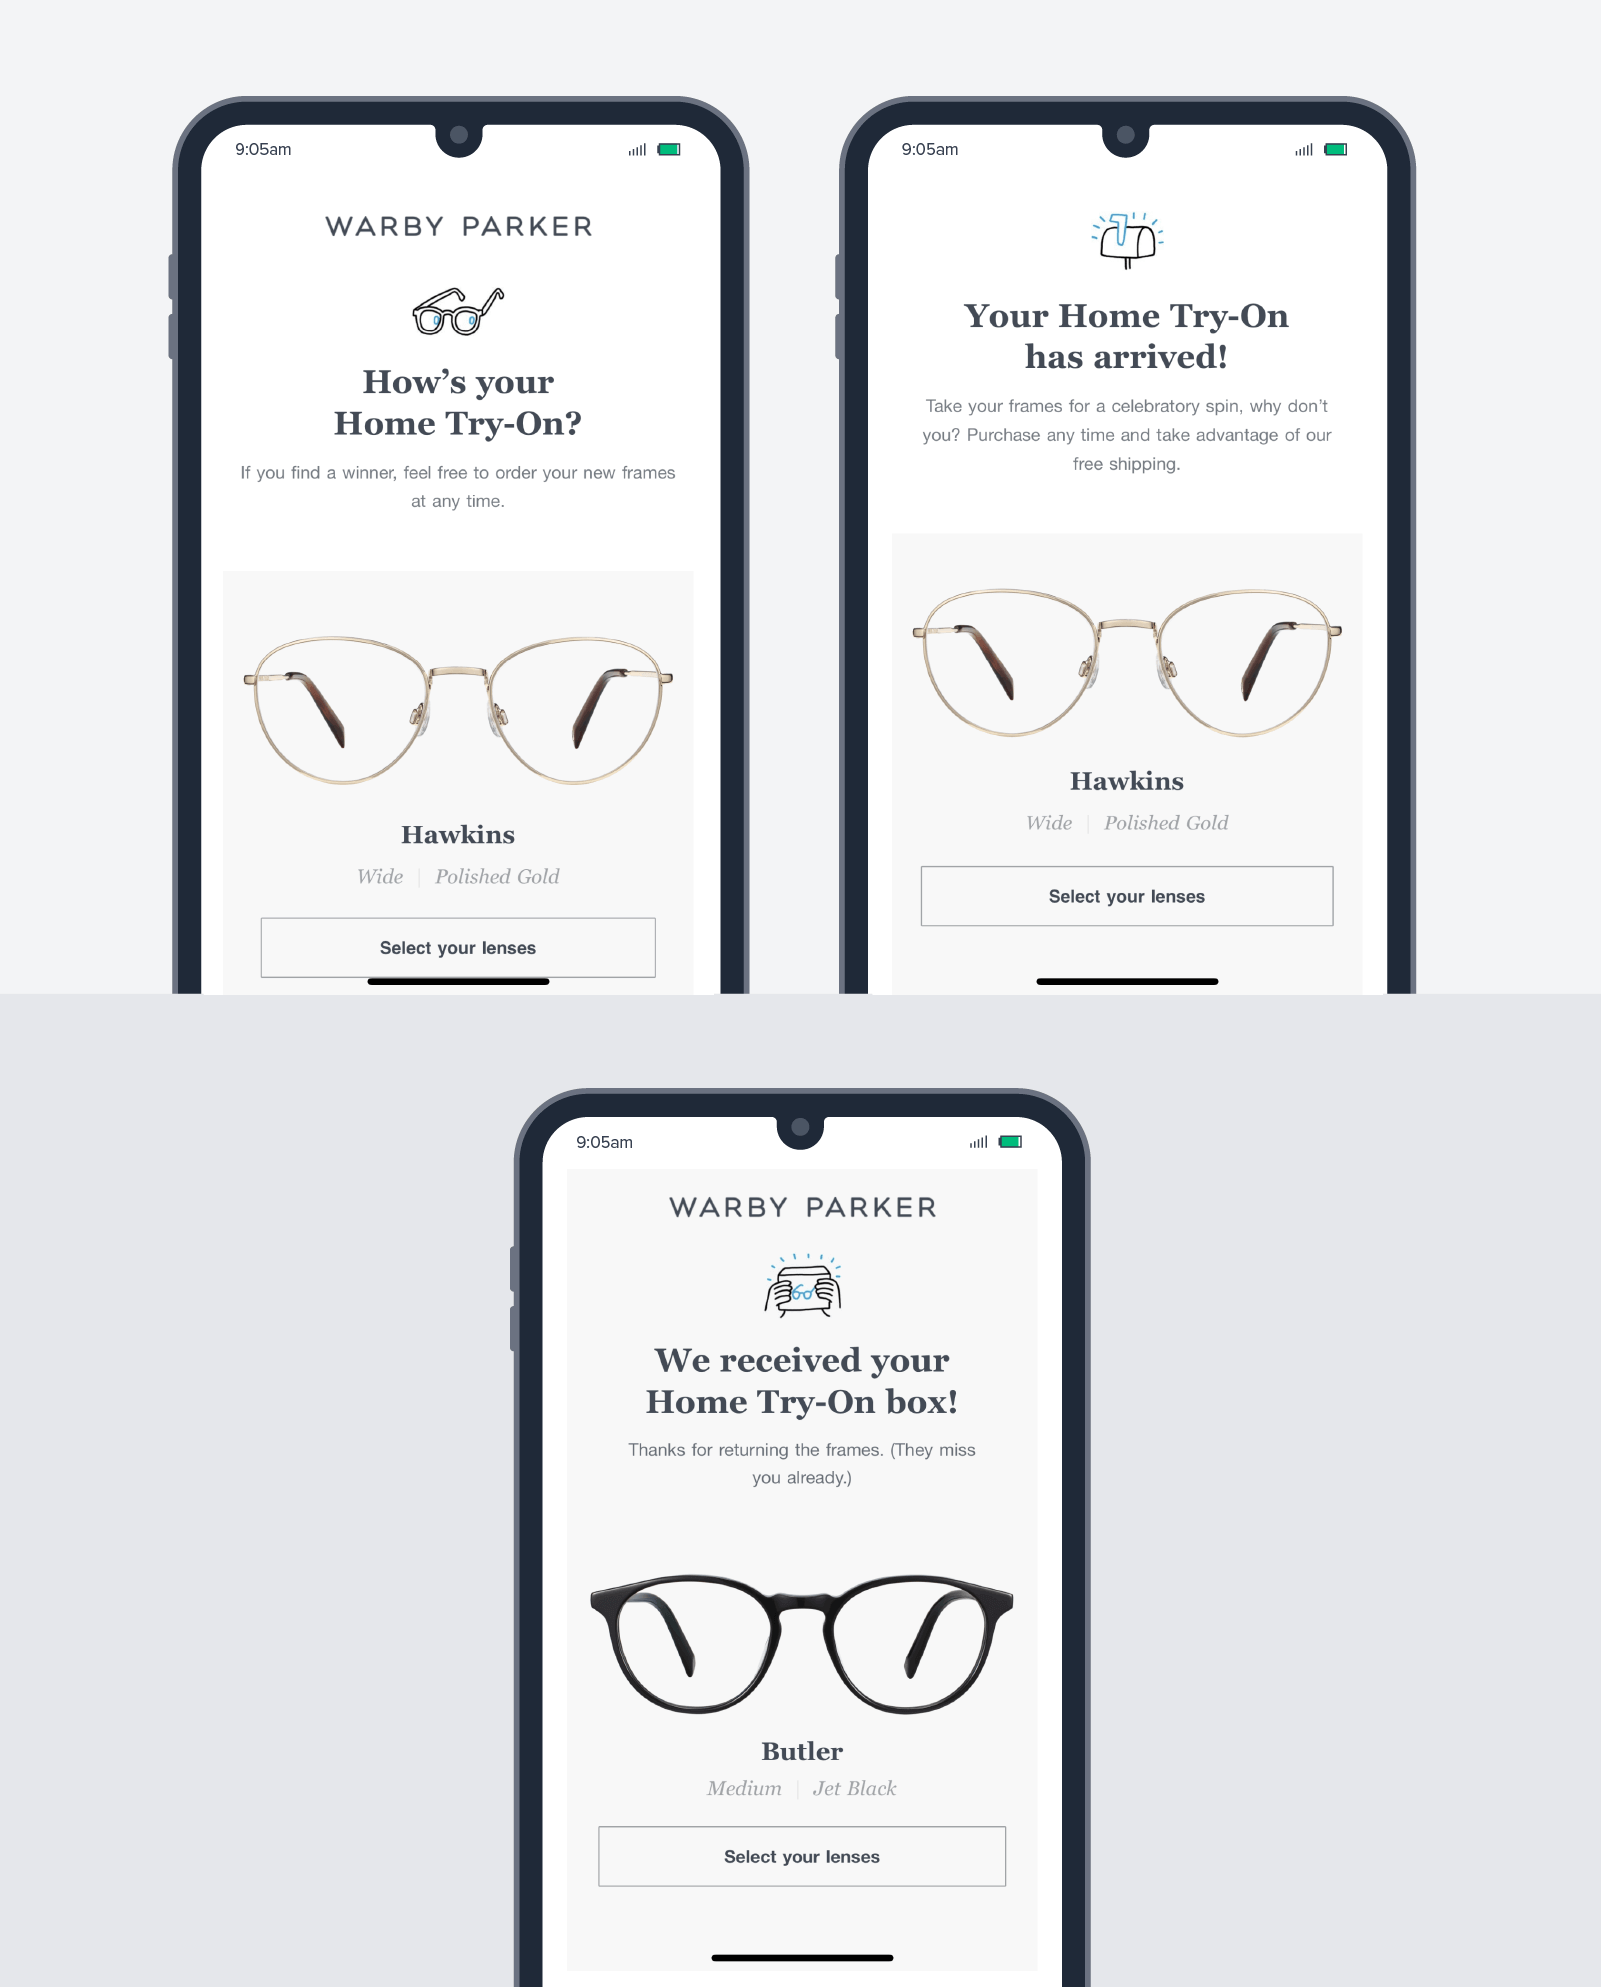 Warby Parkers prompt the user to complete purchases